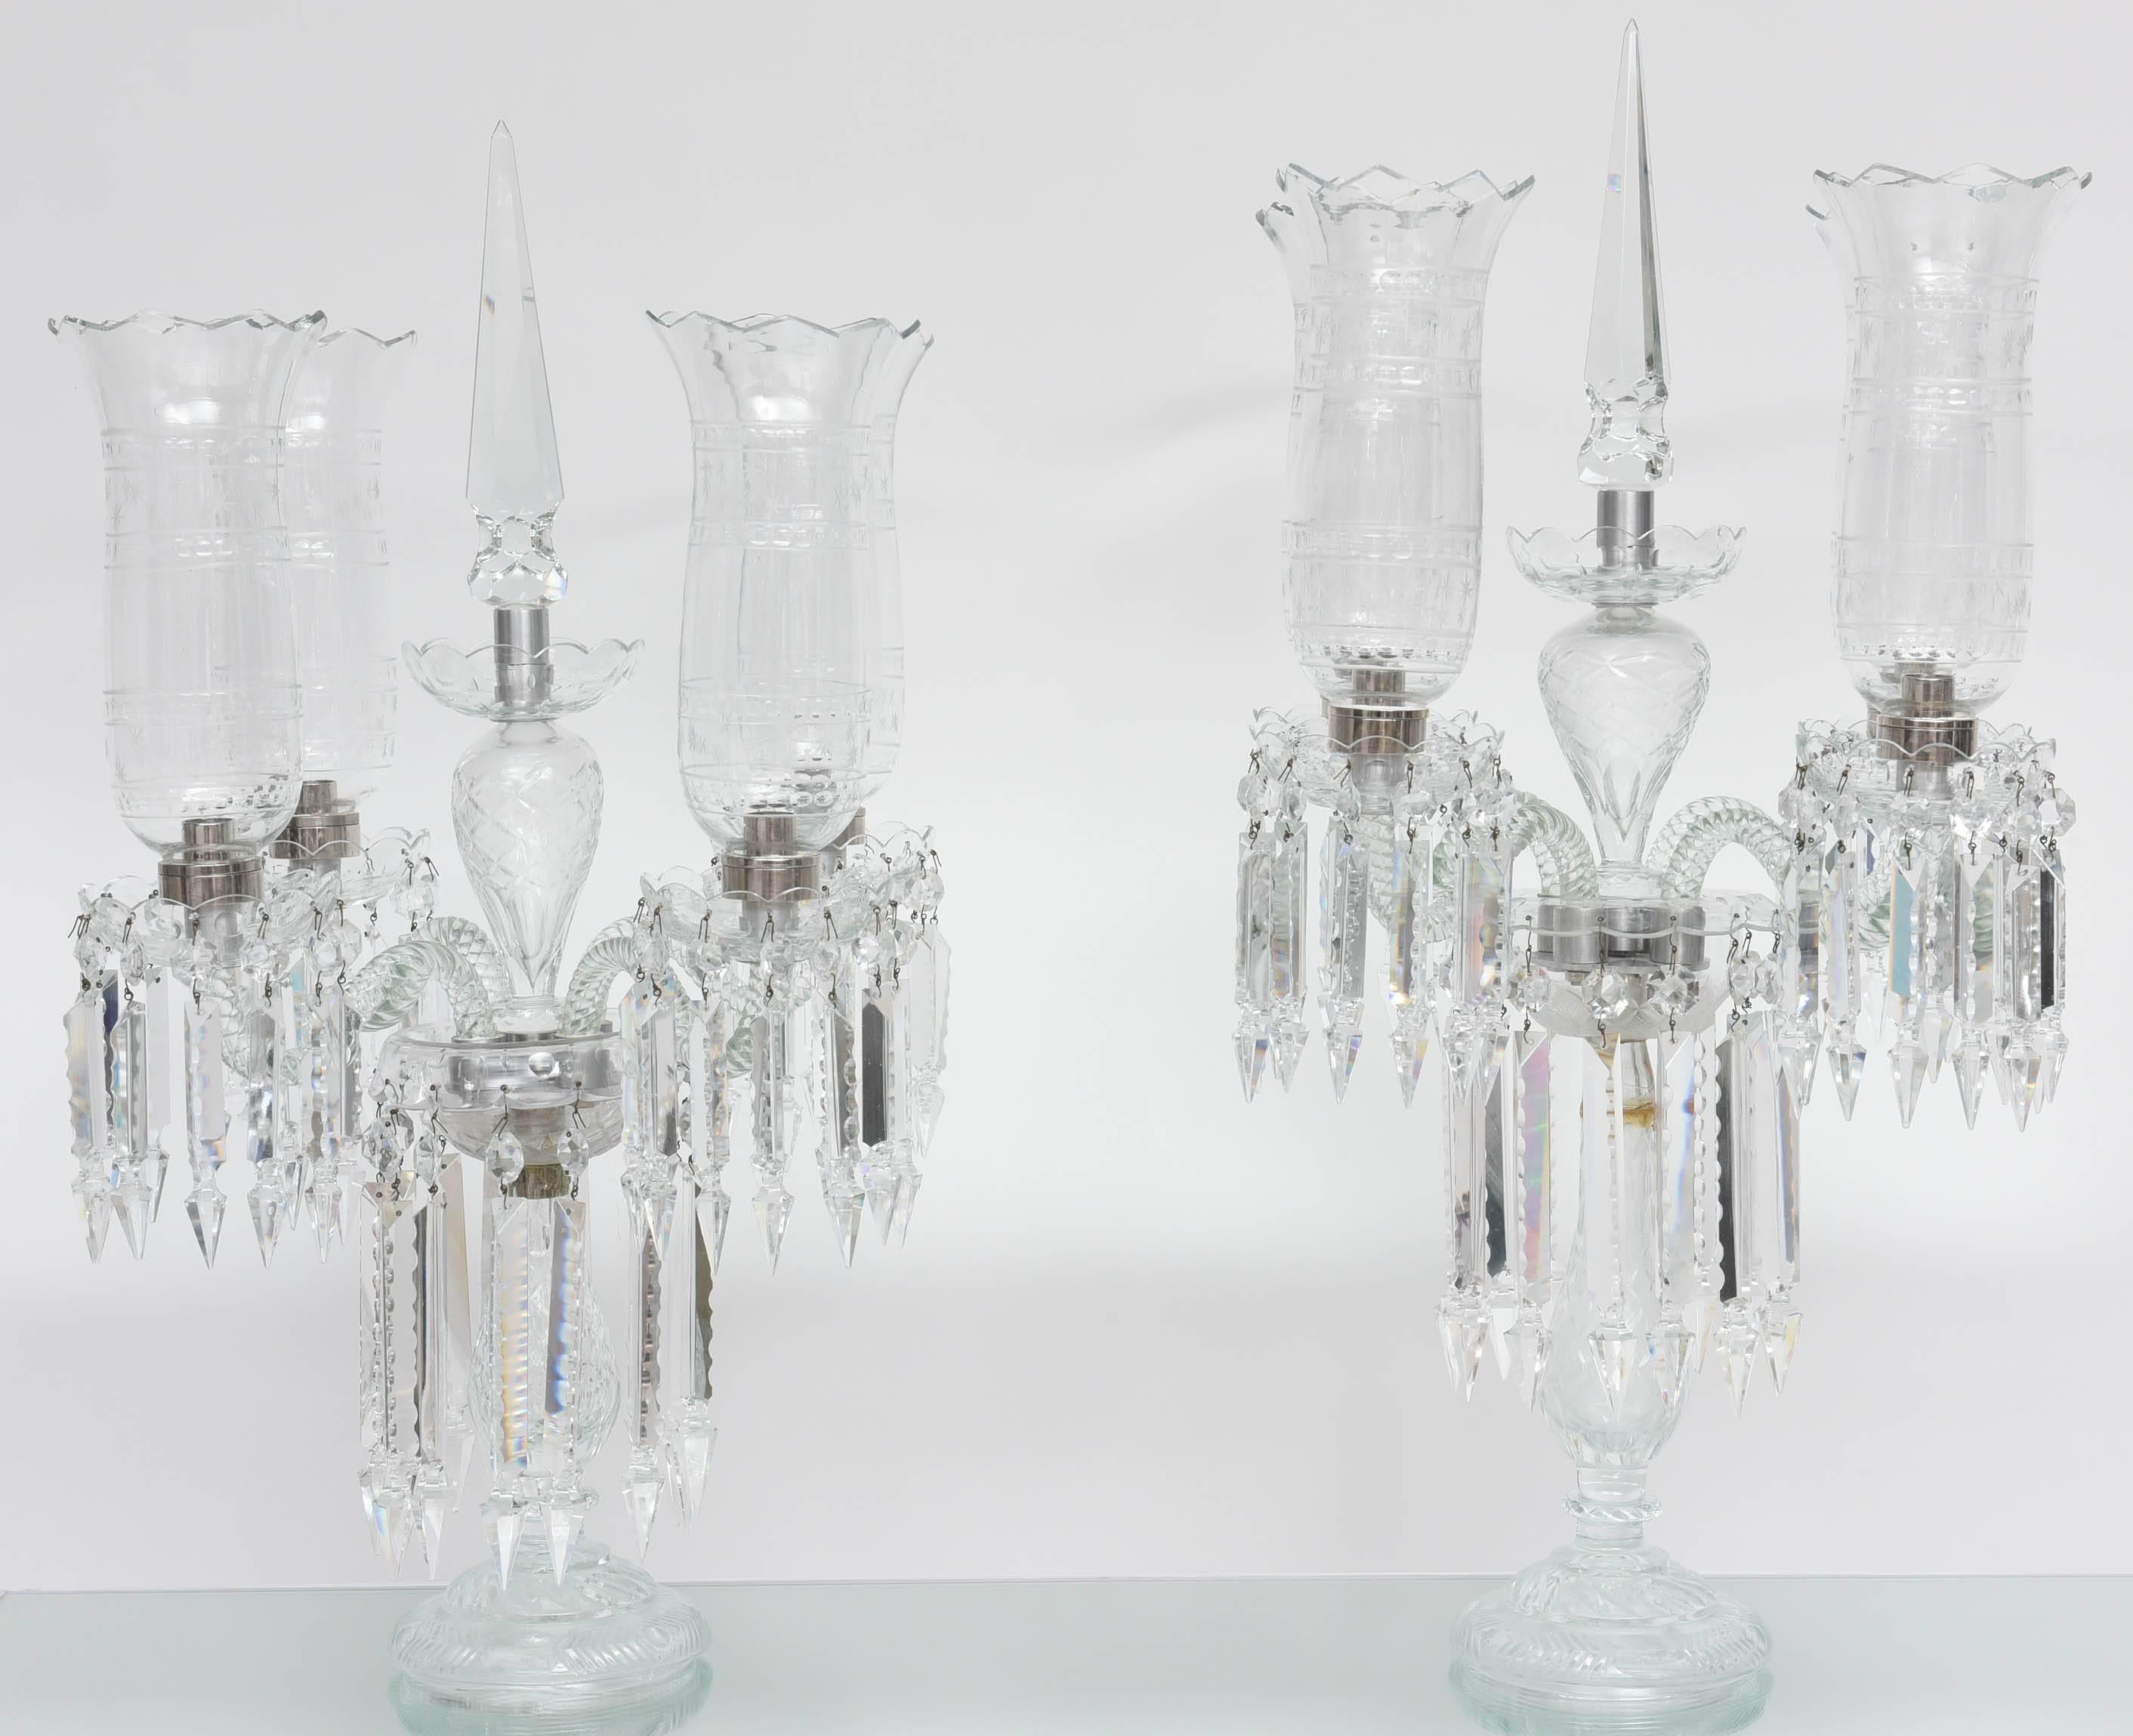 This monumental pair of Baccarat attrubuted Regency style girandoles date from the late 19th to early 20th century. They are hand-cut crystal with four candle-arms with hurricanes globes.  At some point the central support stems were damaged and